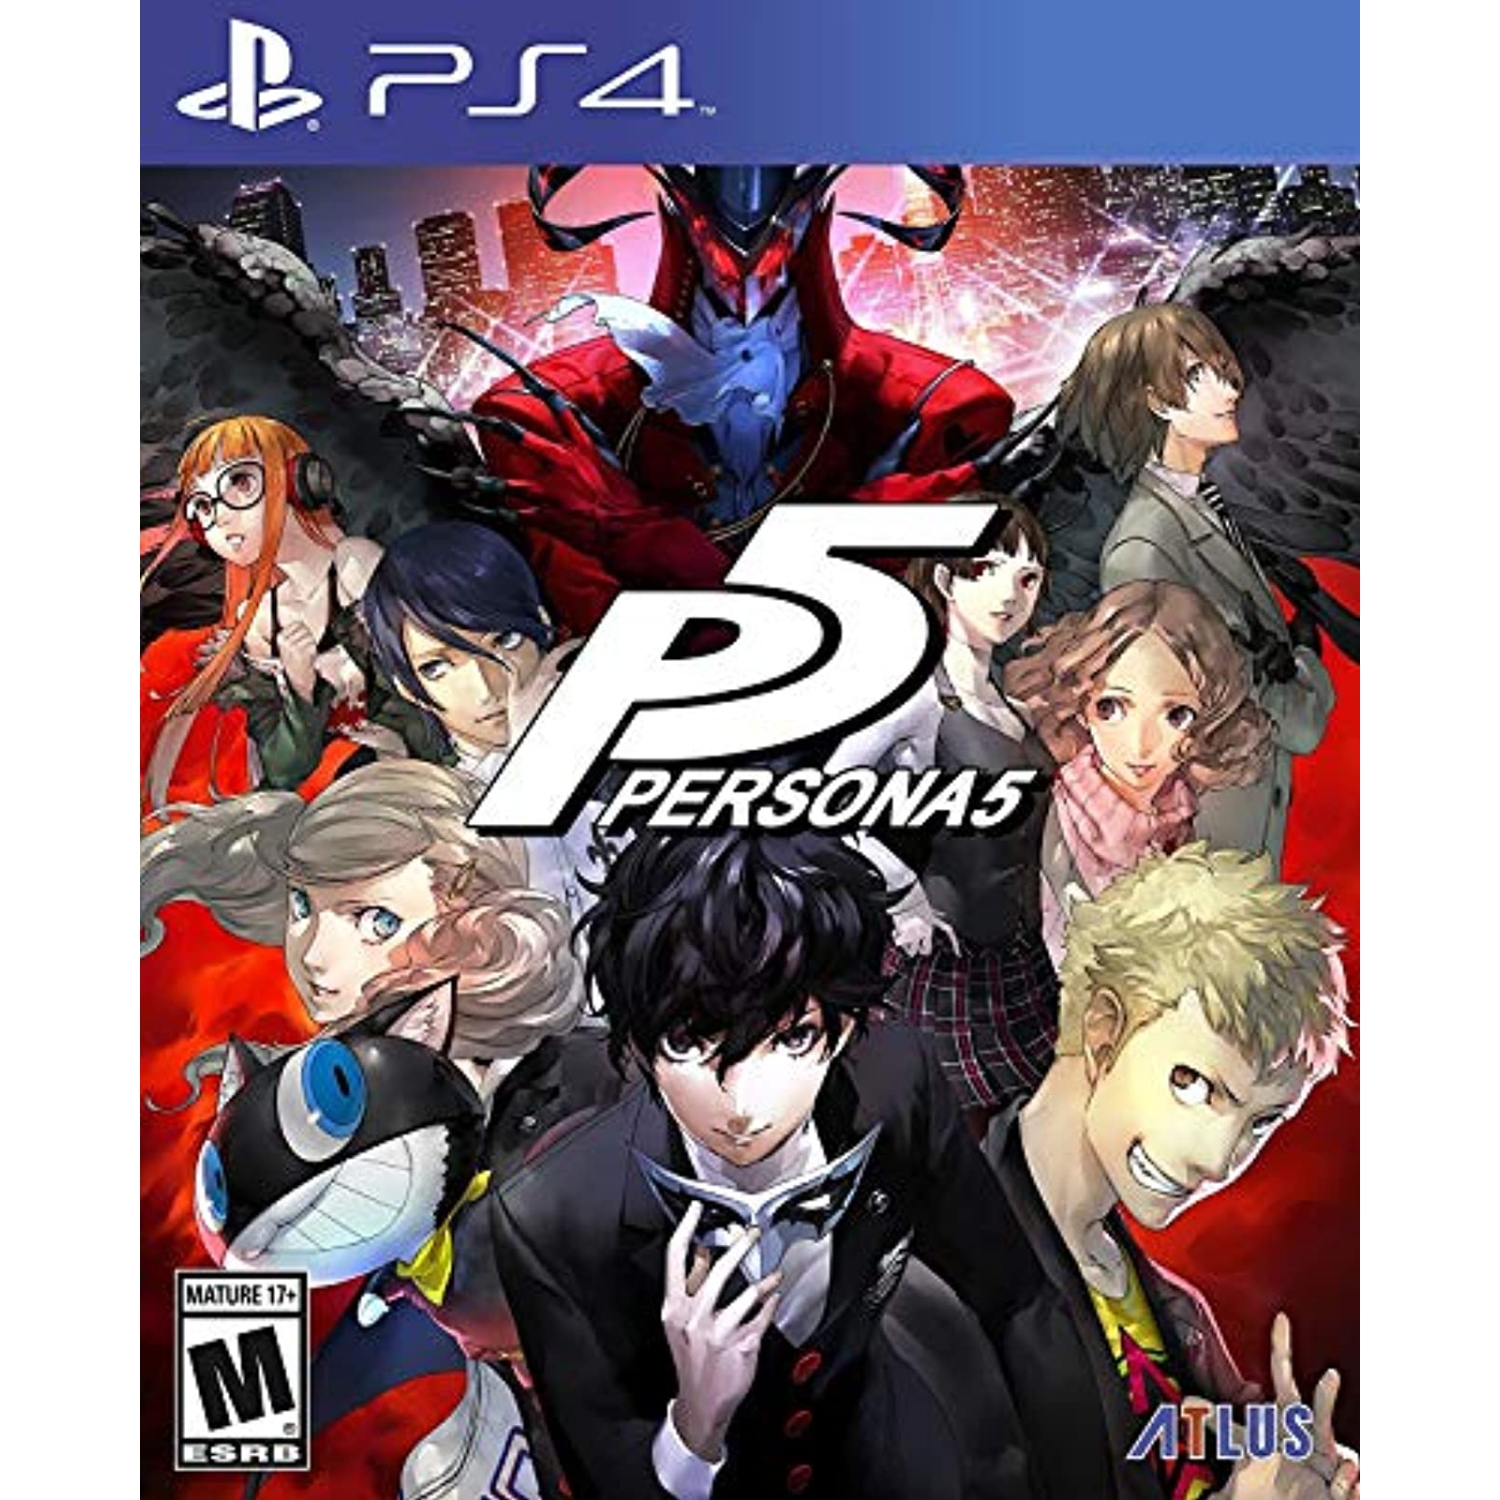 Previously Played - Persona 5 PlayStation Hits Standard Edition For PlayStation 4 PS4 RPG